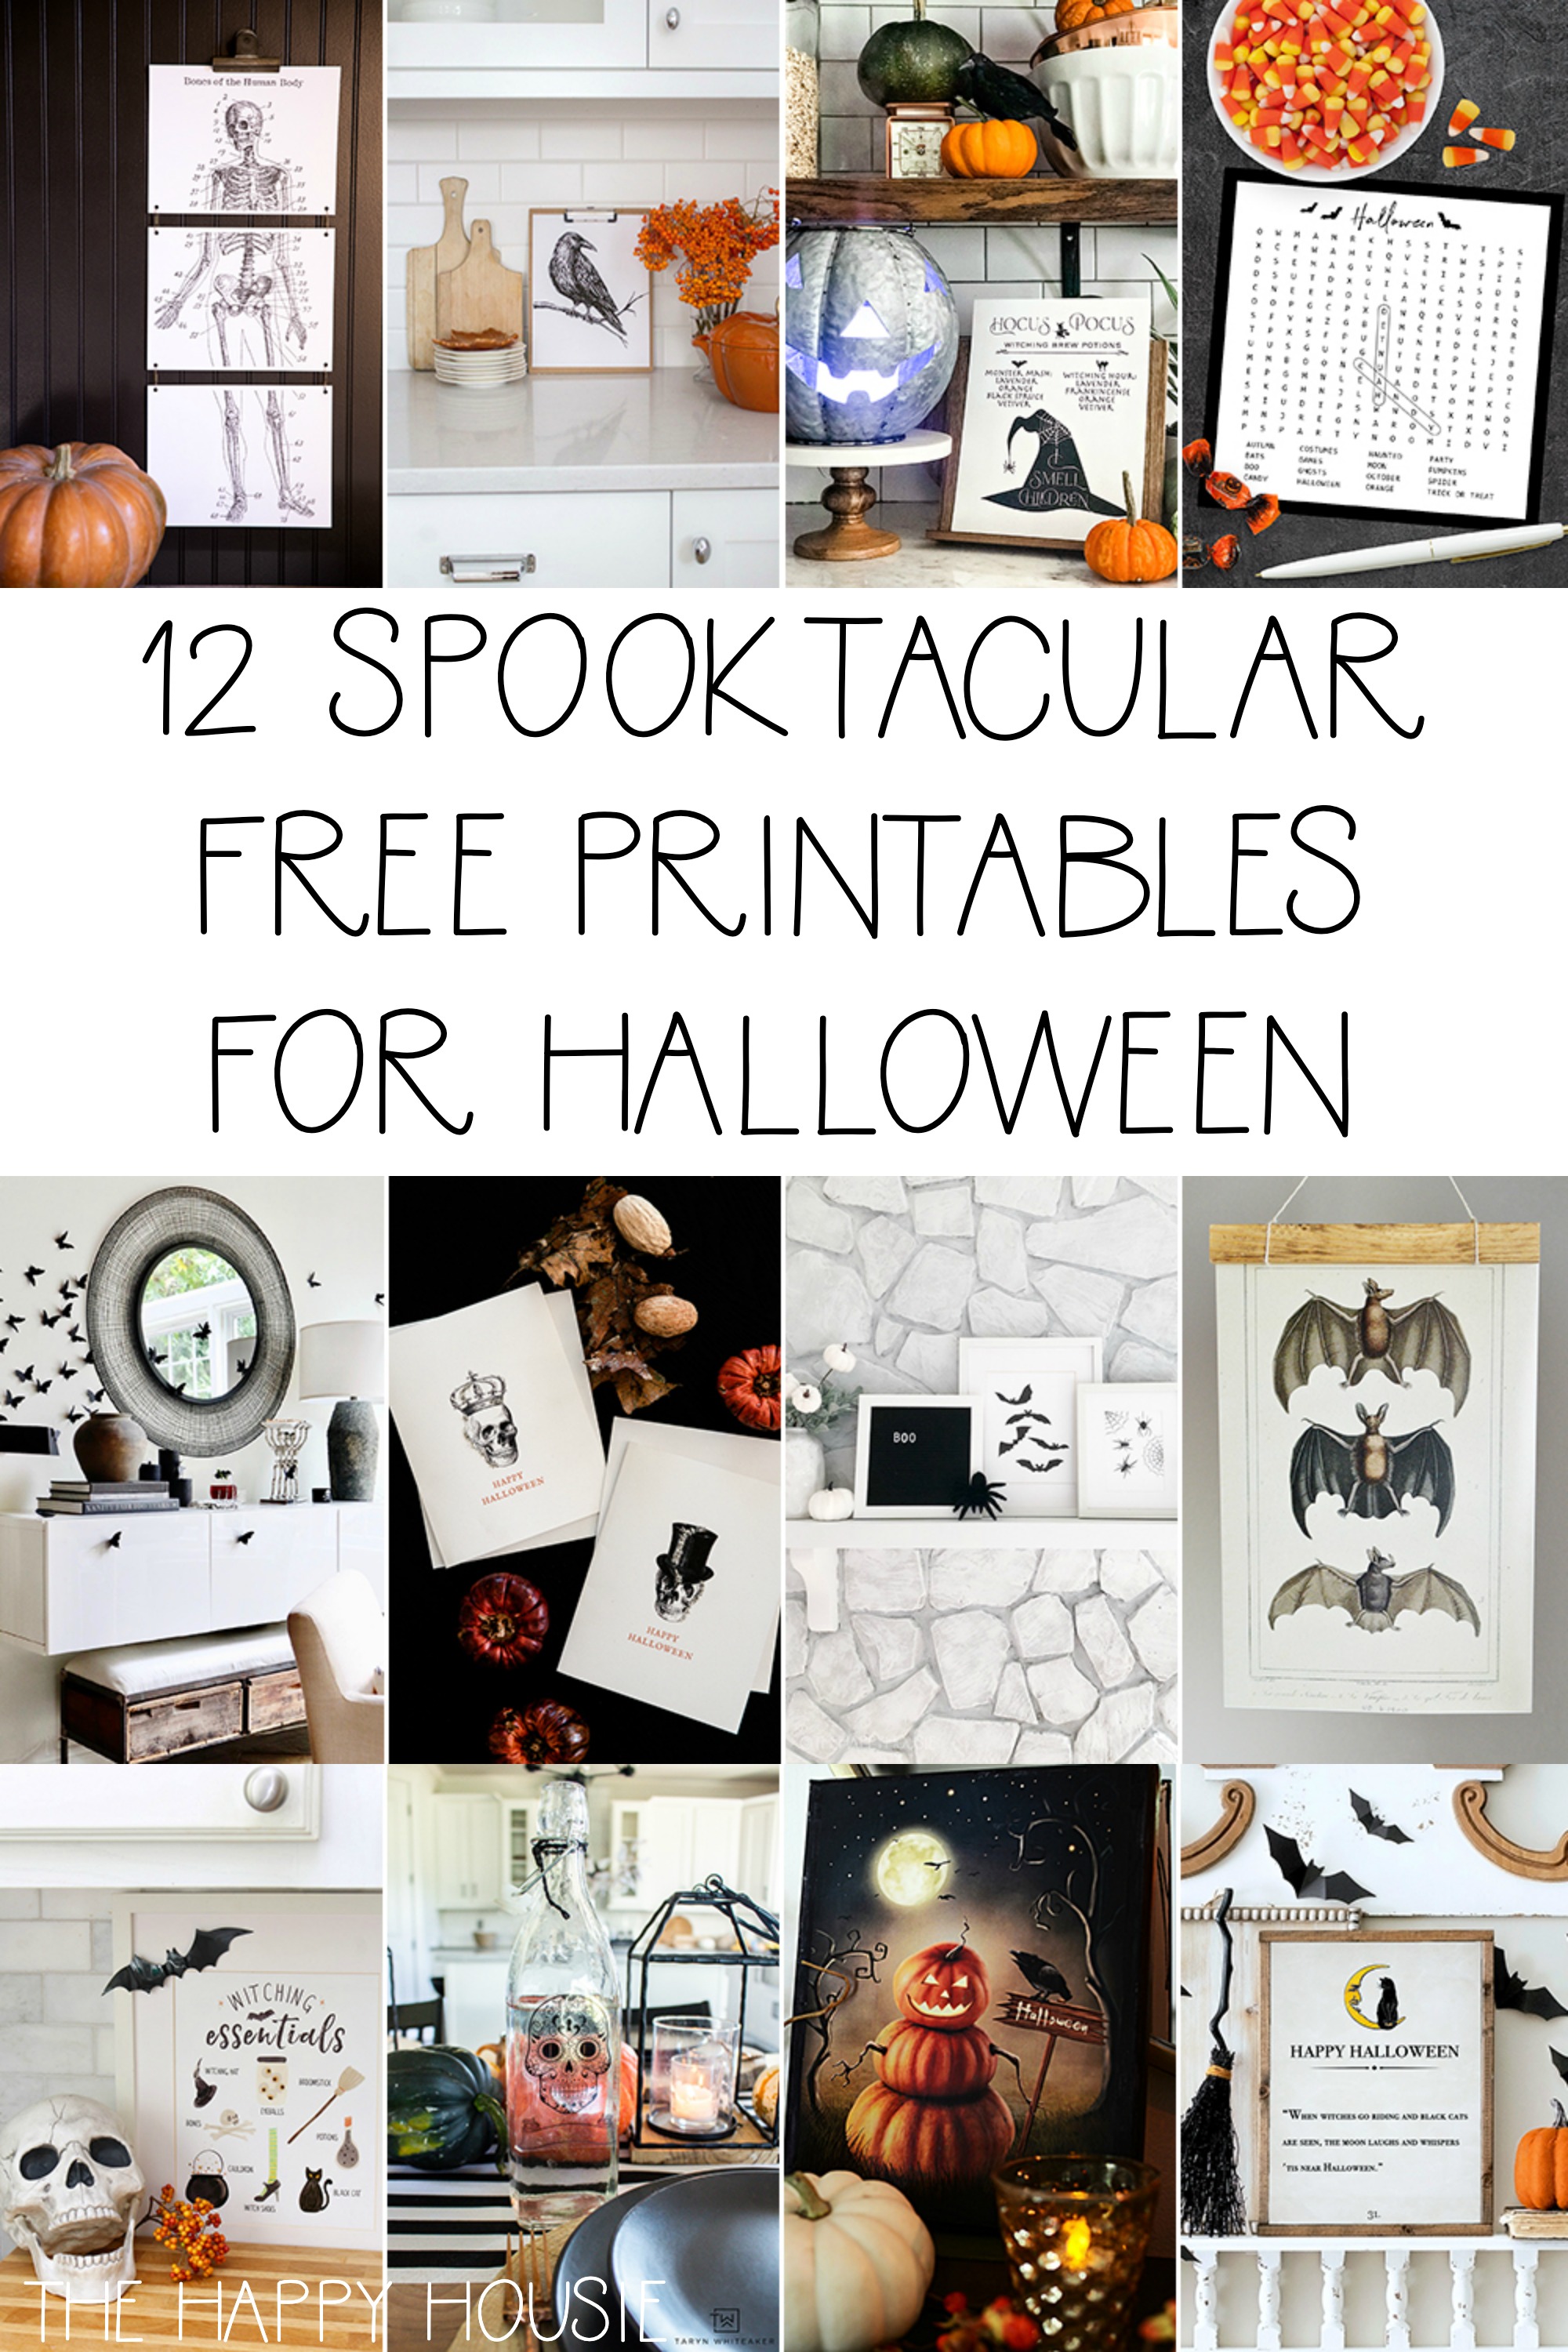 12 Spooktacular Free Printables For Halloween poster.